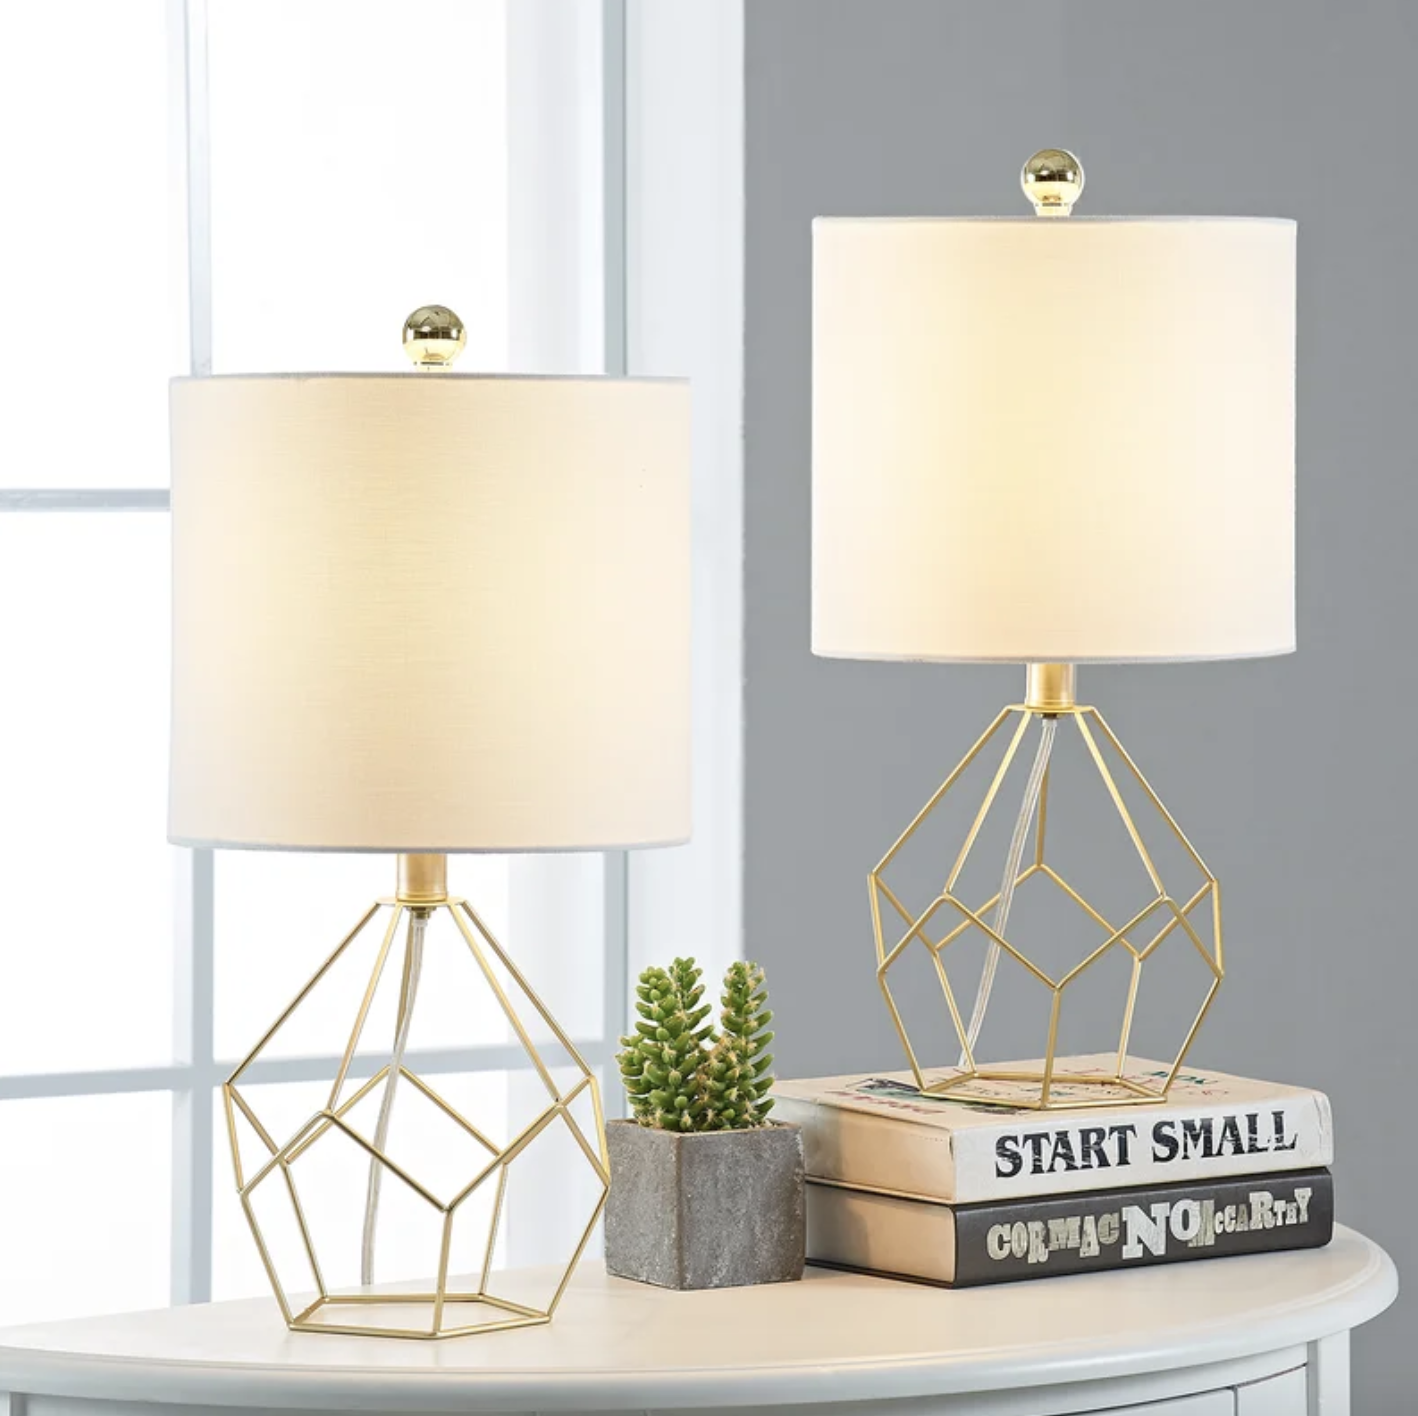 the gold geometric table lamps